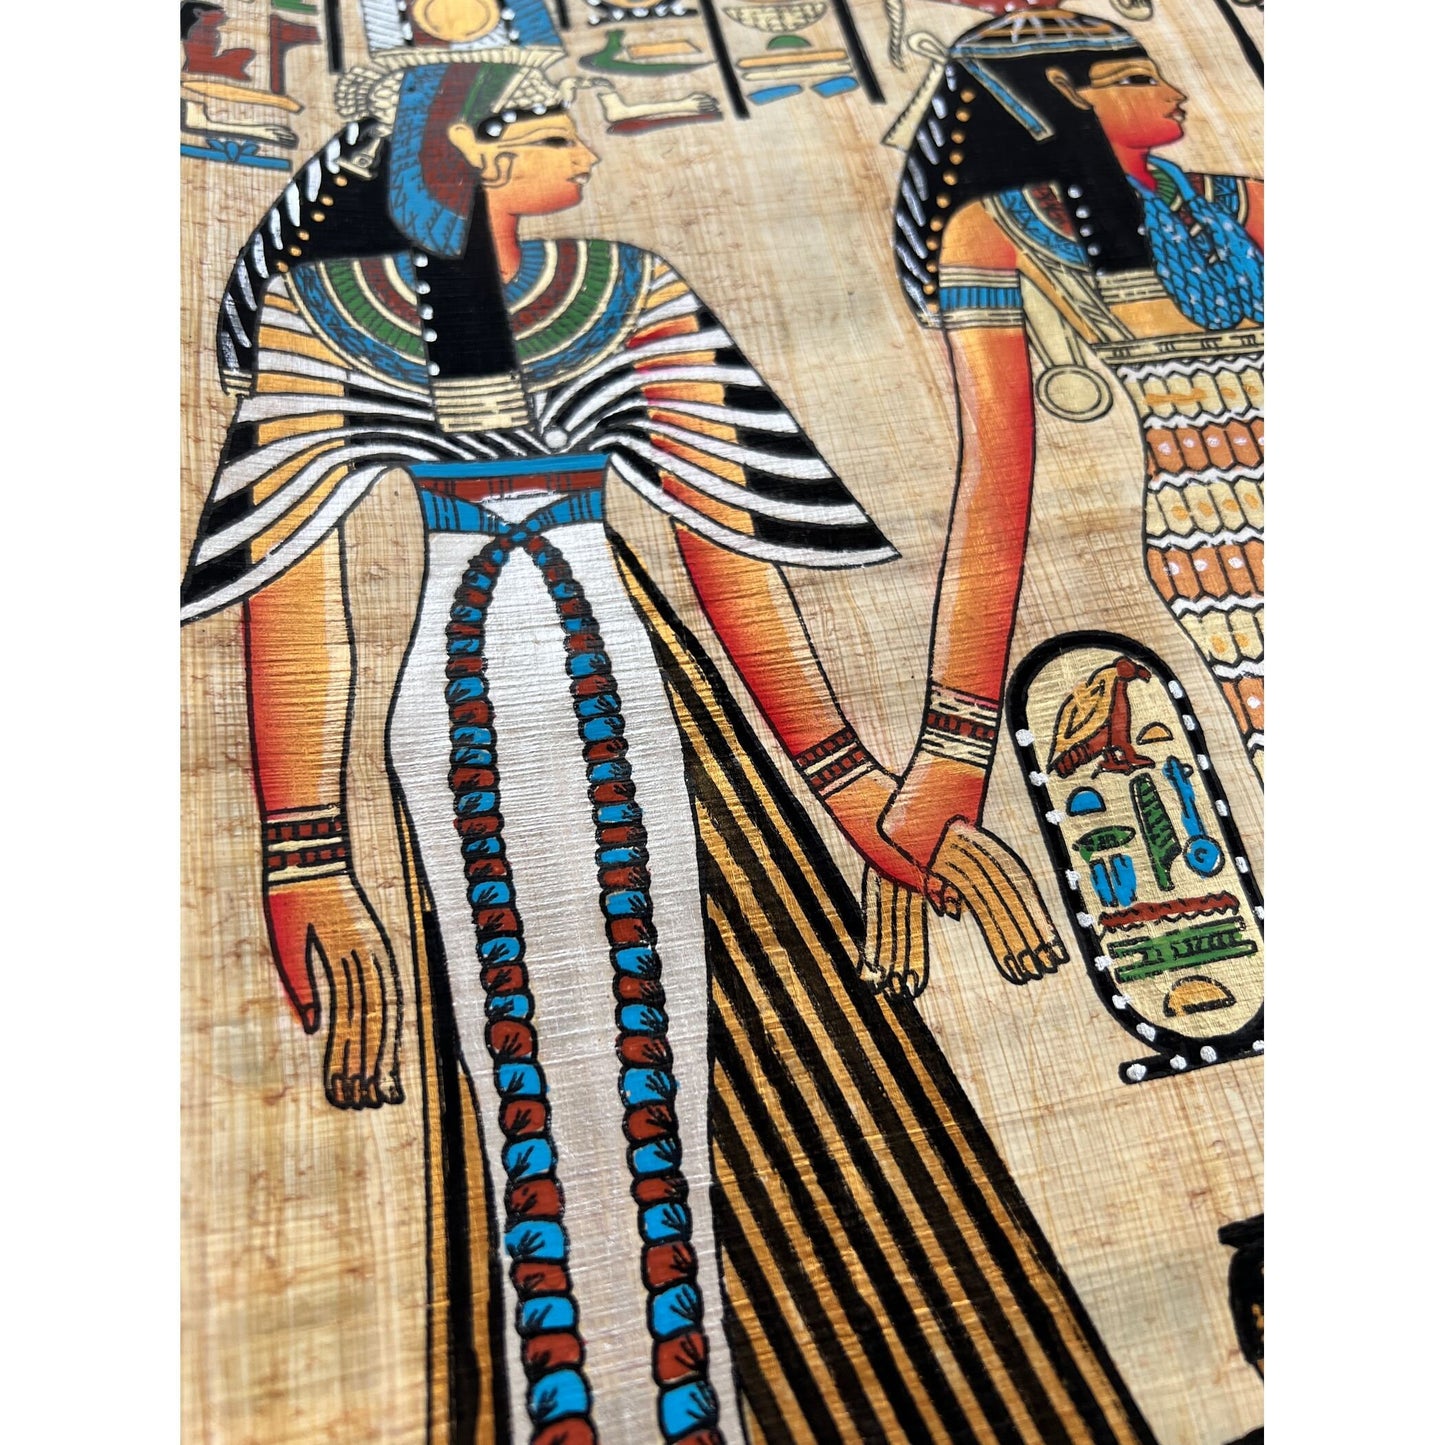 Isis Leading Queen Nefertari - Place in The Sacred Land Masterpiece Story - Egyptian Hand Painted Papyrus Artwork, Wall Decor- 13x17 Inches